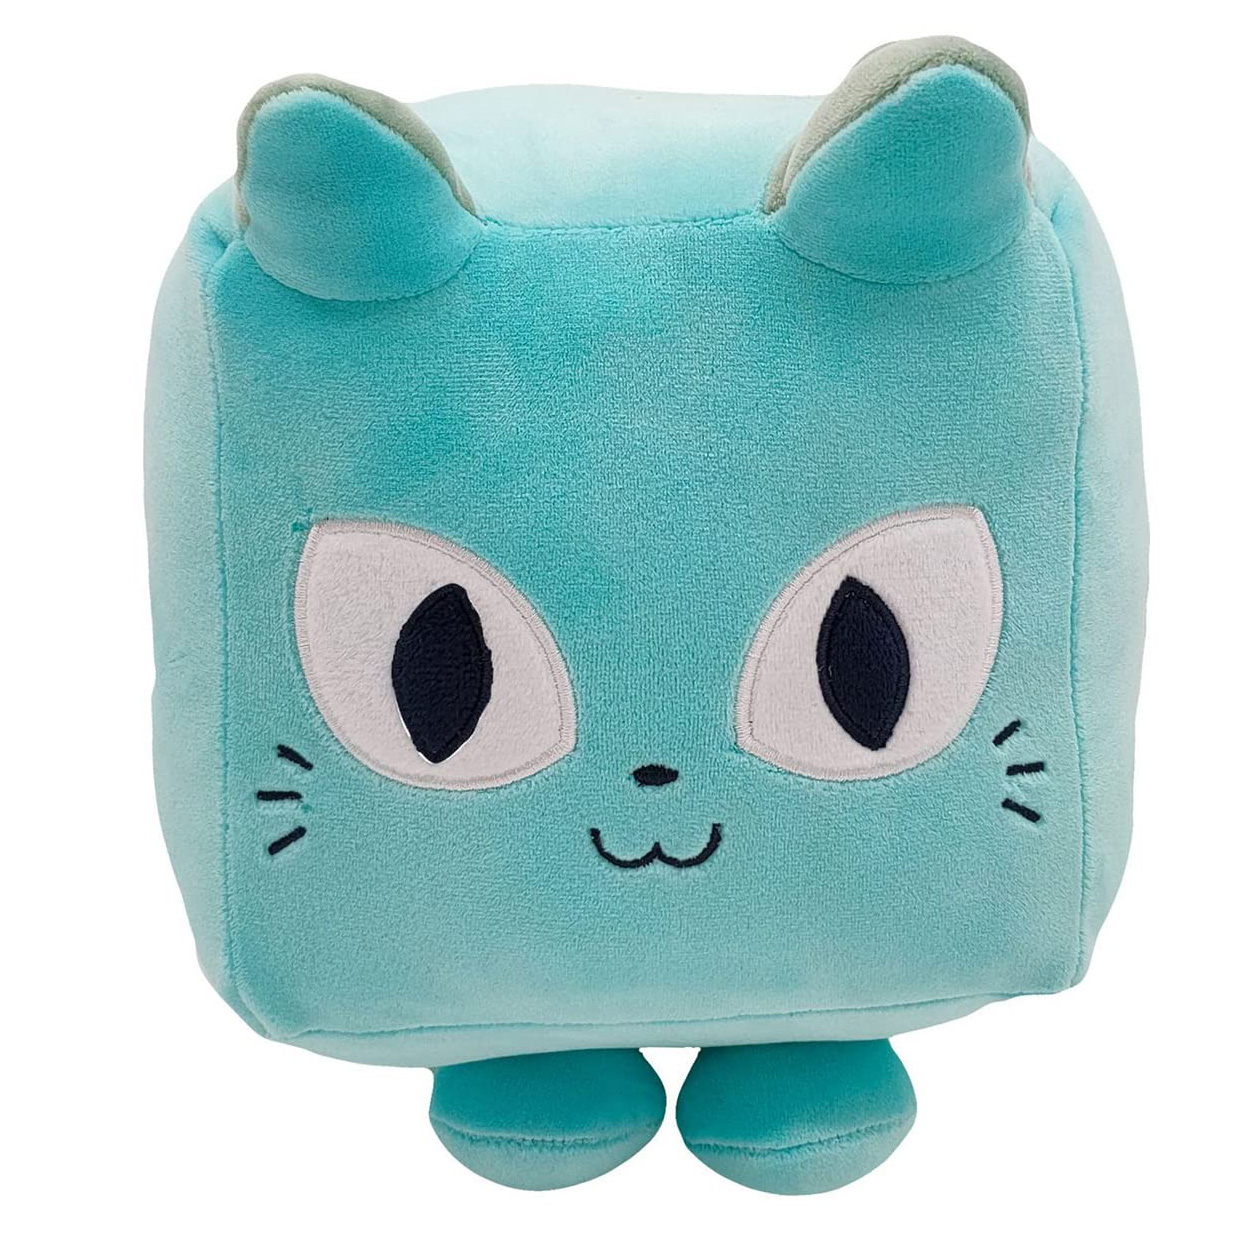 Teal Cat Stuffed Animal Kawaii Cute Soft Toy for Kids and Fans